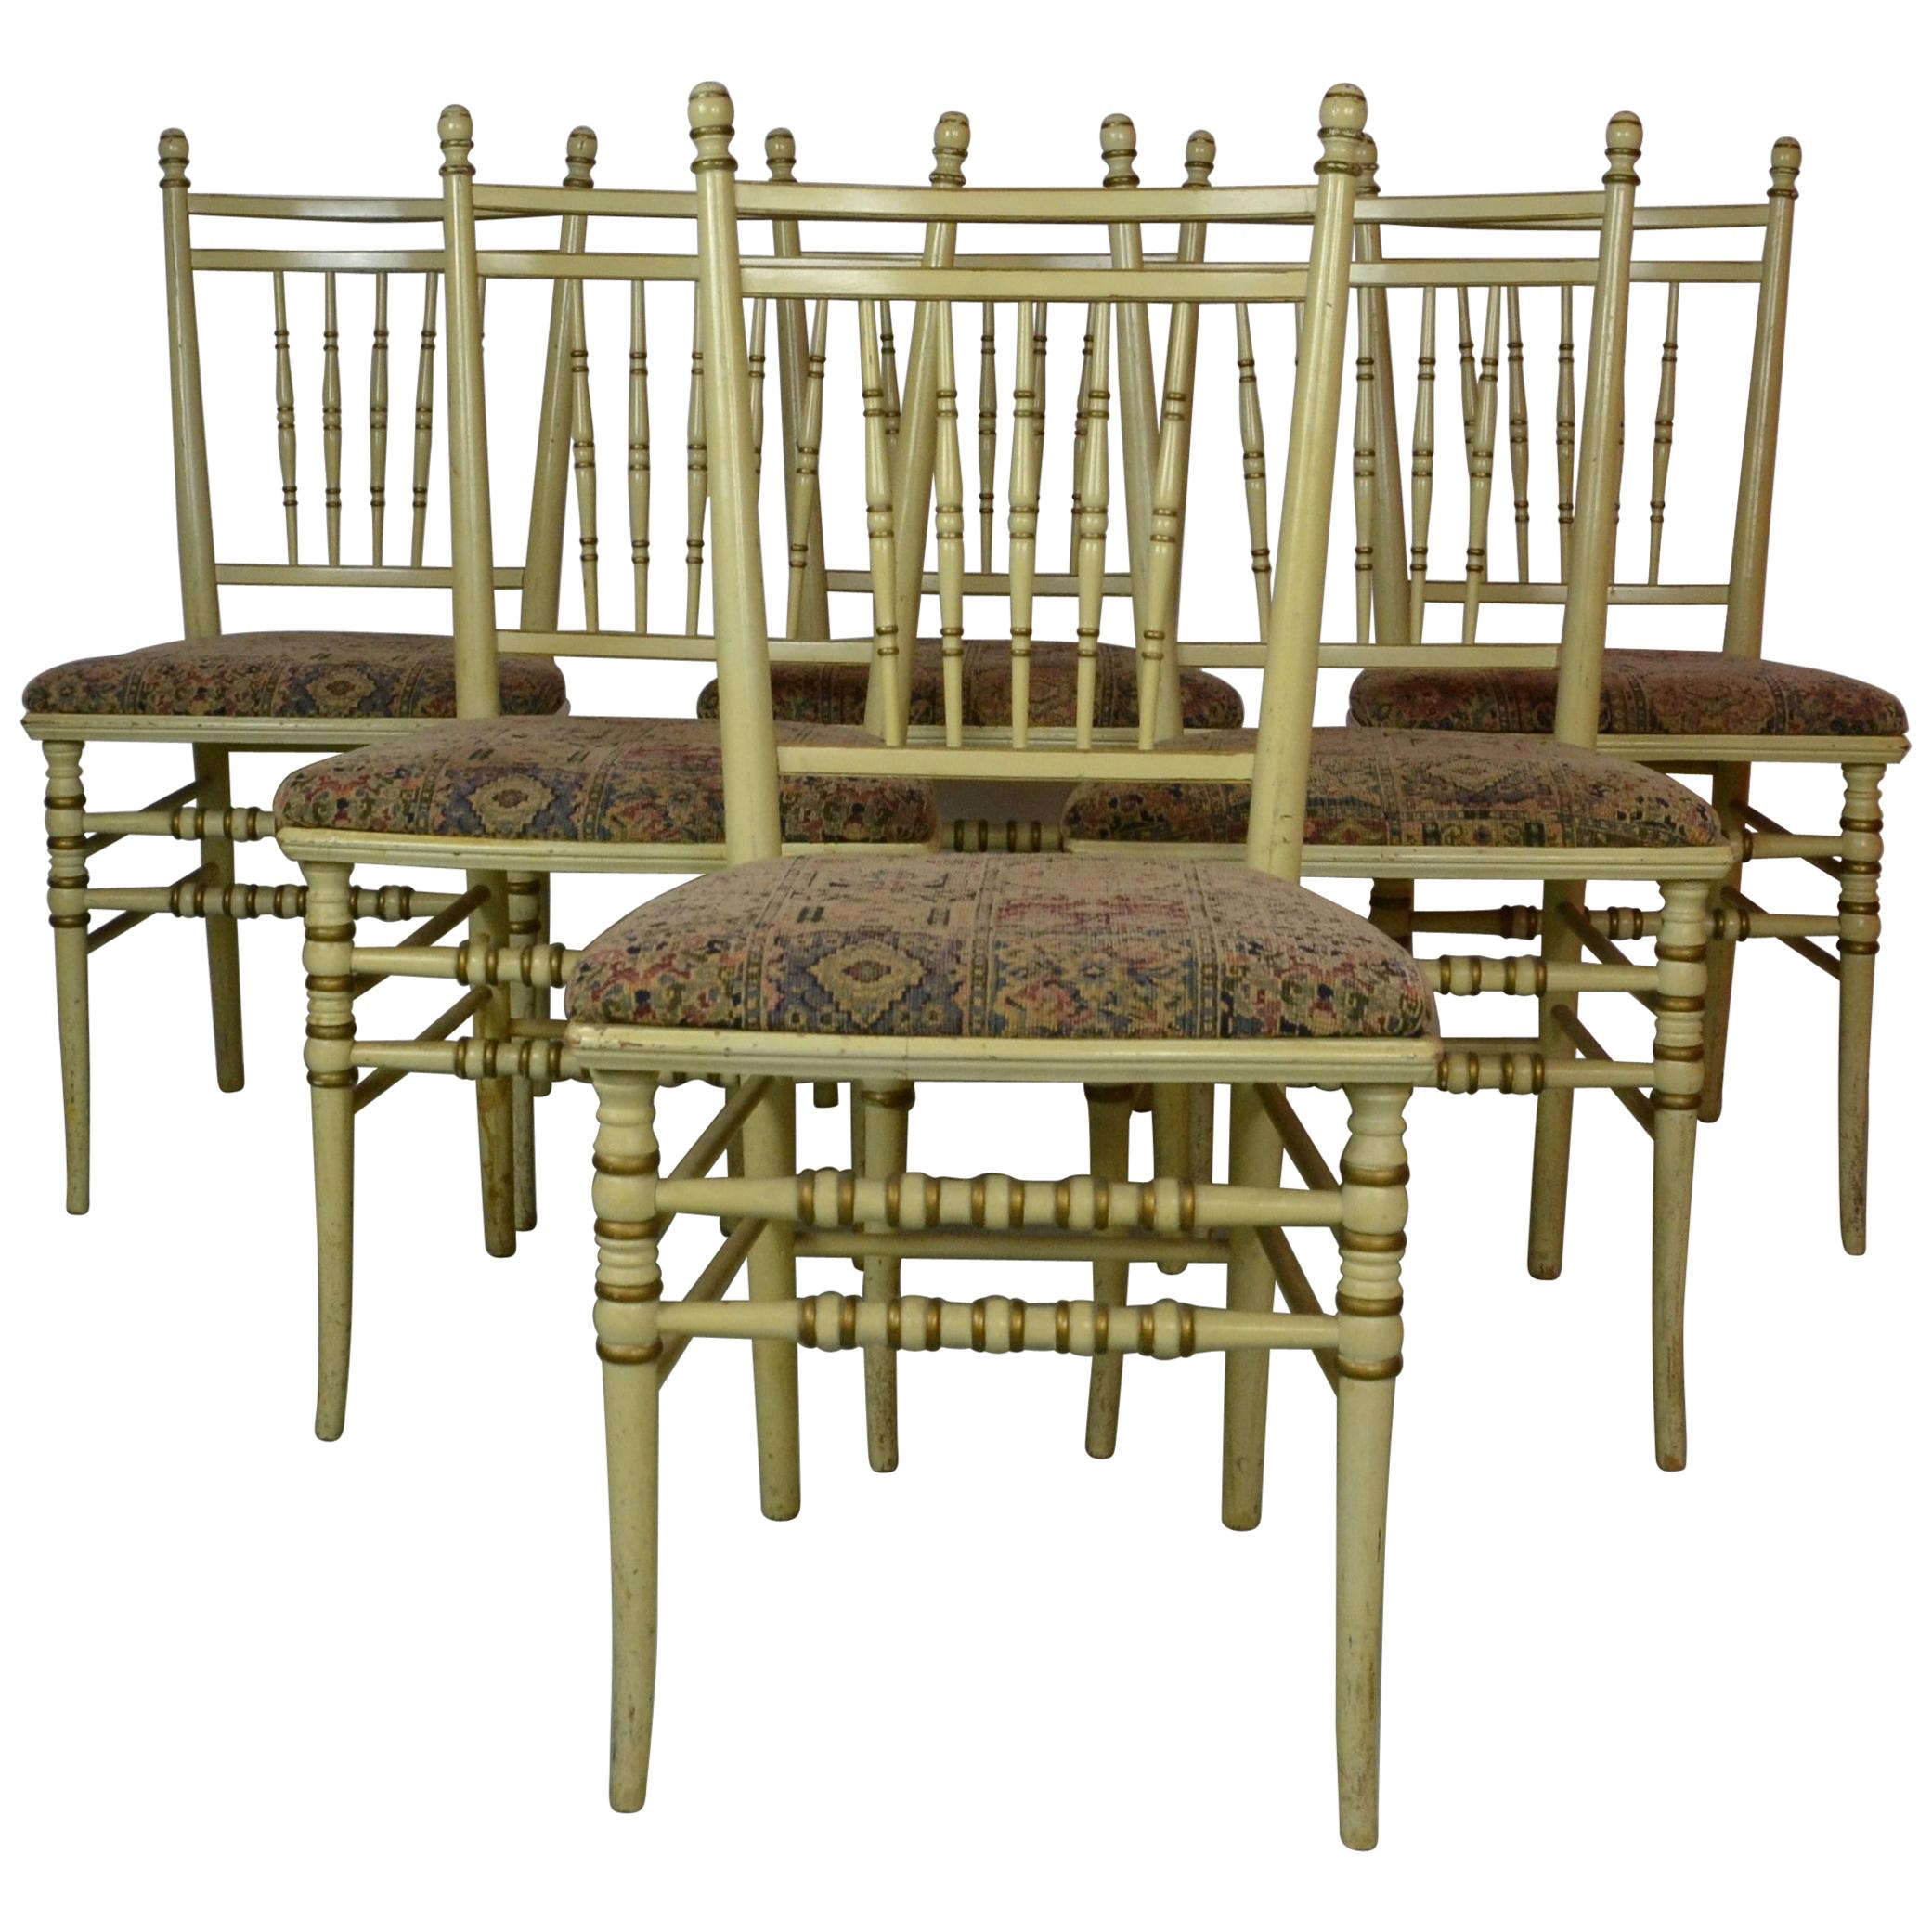 Set of 6 Spindle Back Painted Chairs